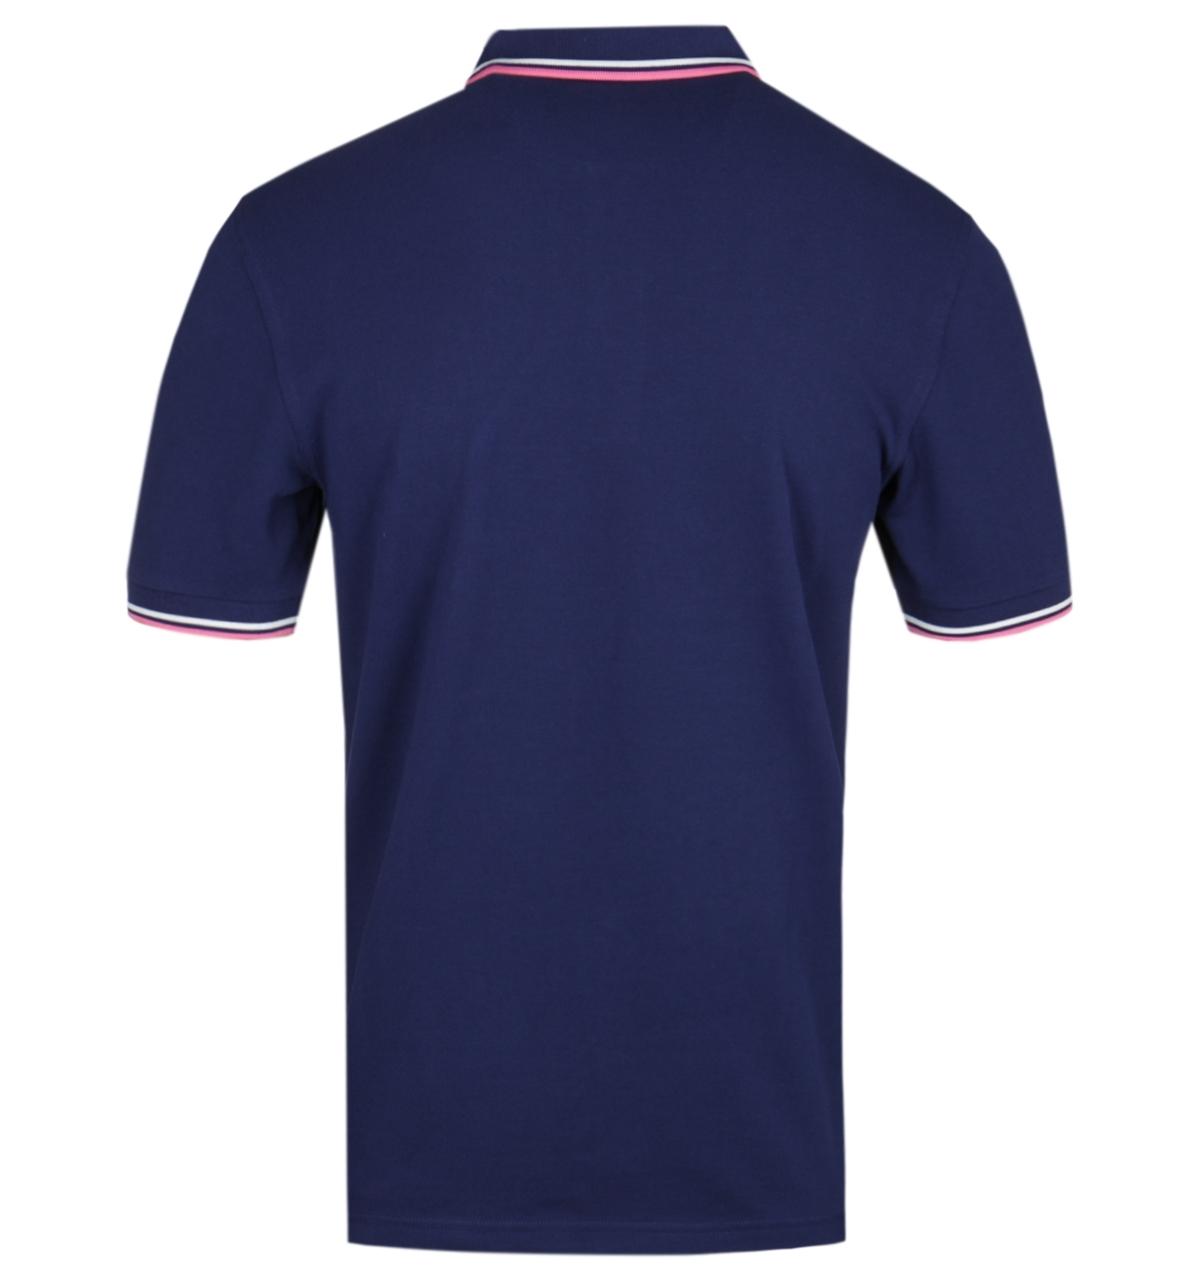 Fred Perry Cotton M3600 Navy & Pink Polo Shirt in Blue for Men - Lyst